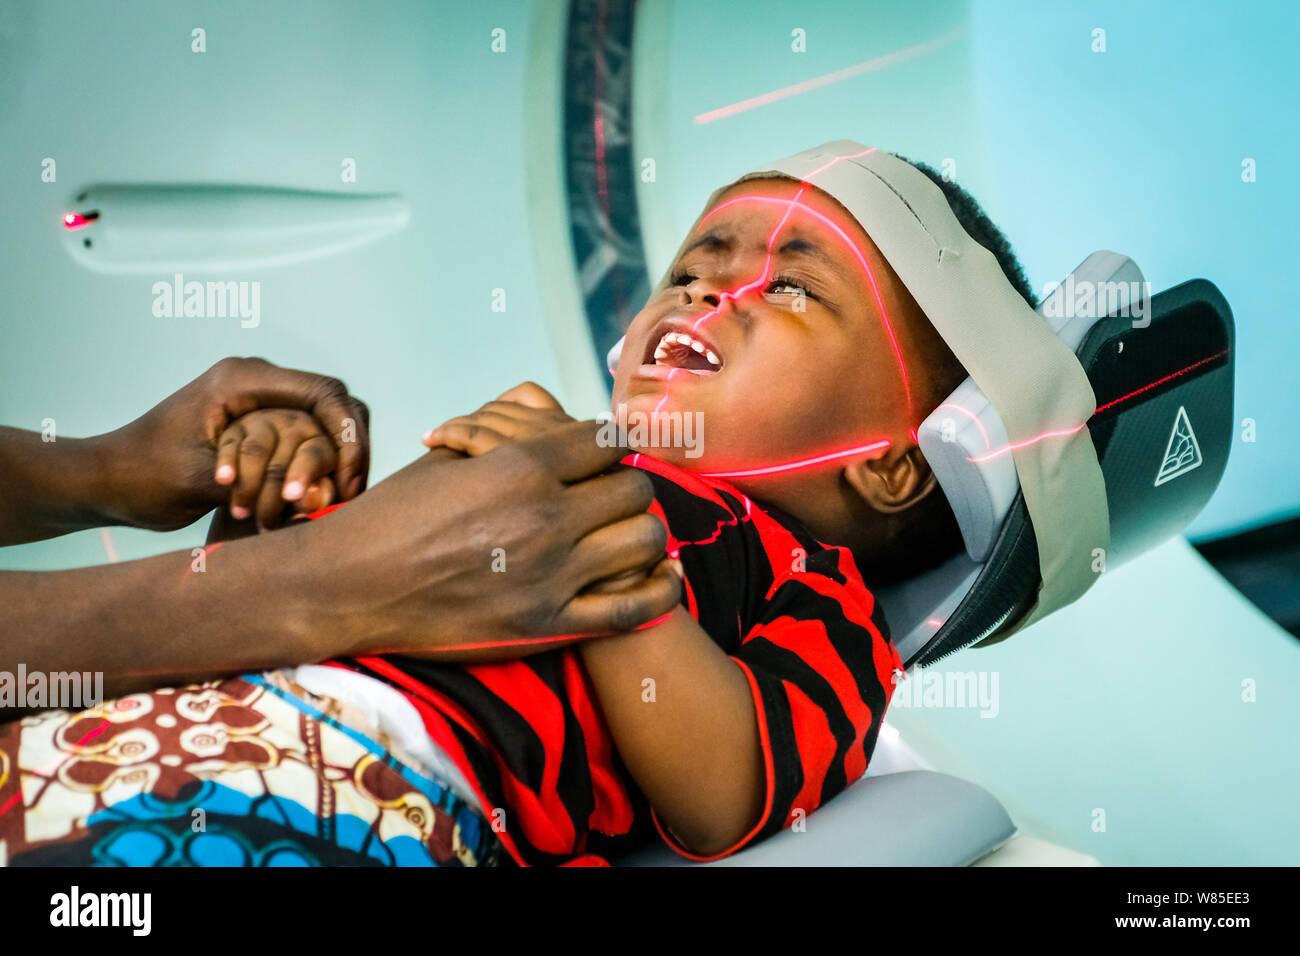 Girl (3 years old) who is suffering from hydrocephalus (spina bifida) in a CT-scanner (computer tomography) at the catholic St. Clare Clinic of the German missionary doctor Dr. med. Thomas Brei in Mwanza, Tanzania, Africa Stock Photo